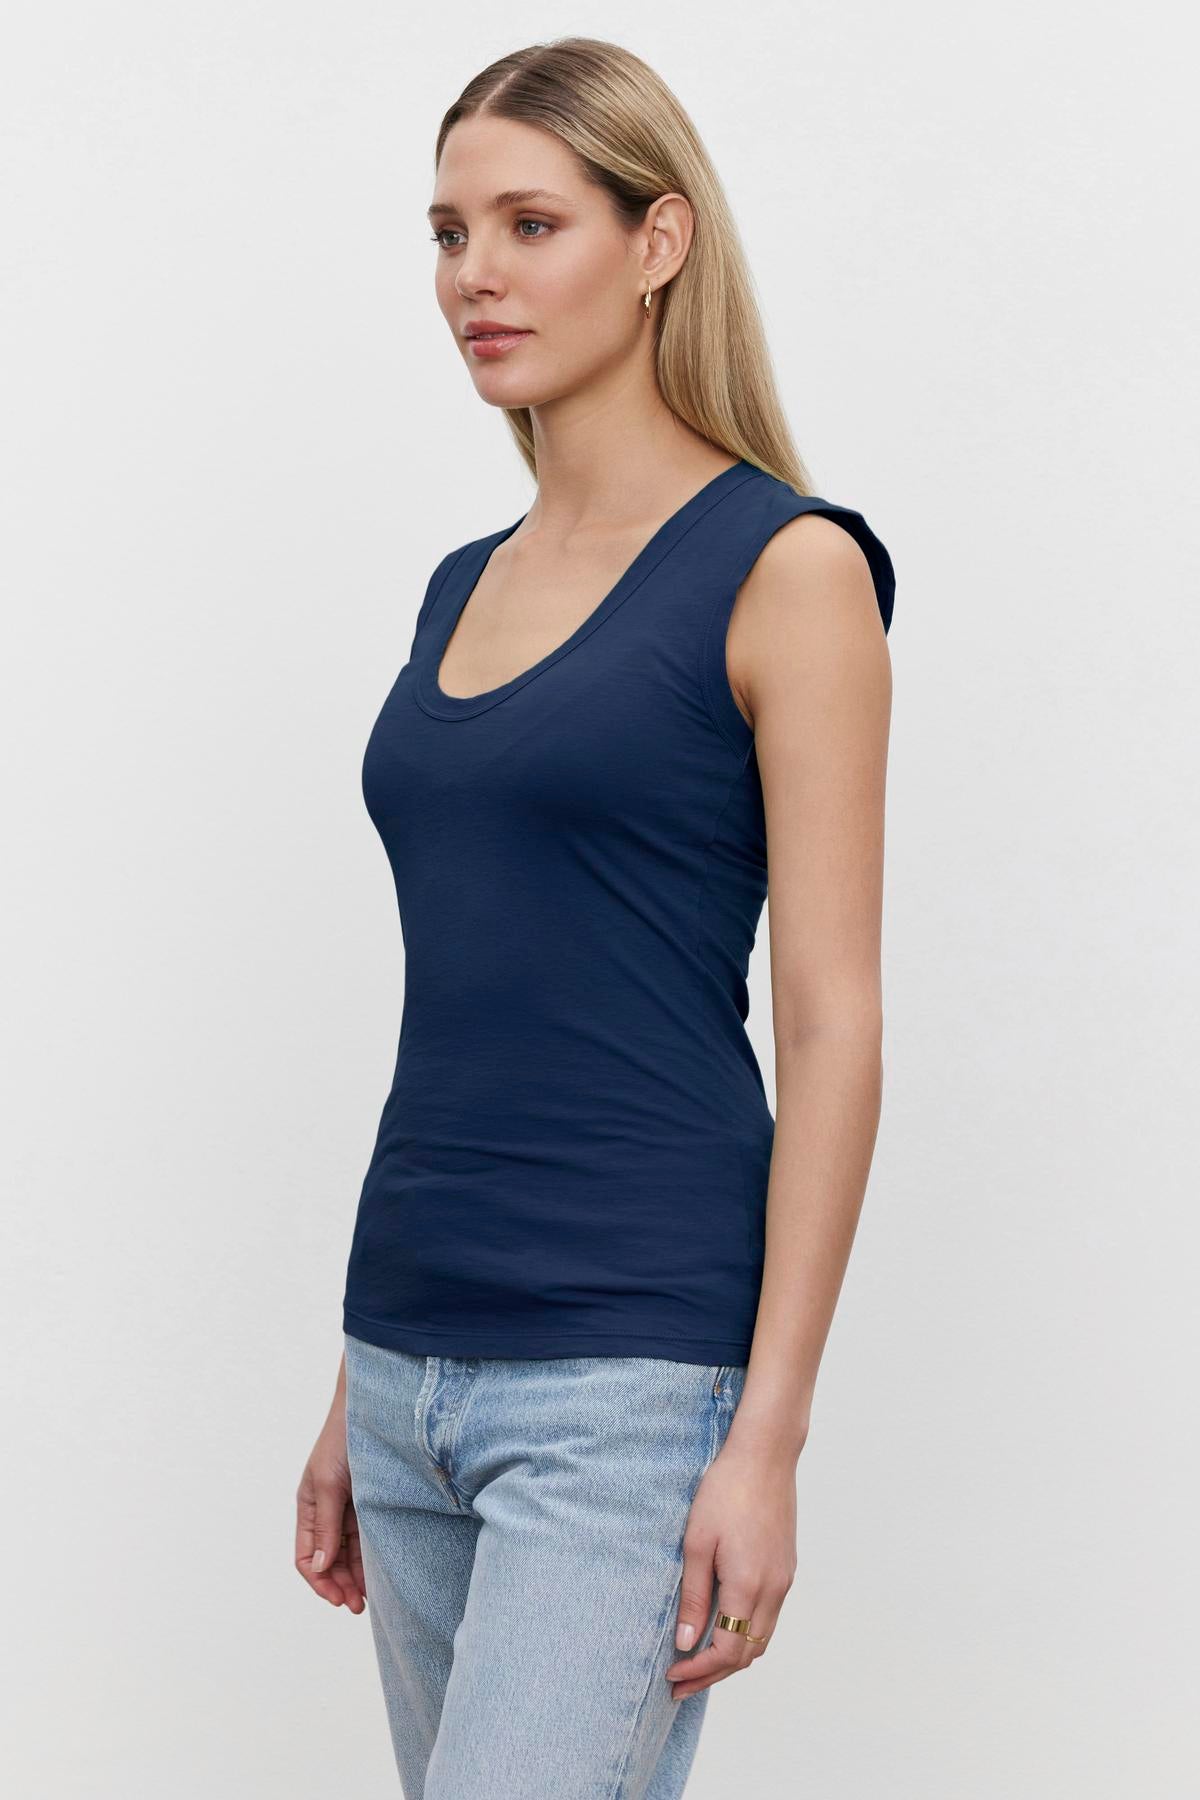 A woman with straight blond hair is wearing a navy blue, low-scoop-neck ESTINA TANK TOP by Velvet by Graham & Spencer and light blue jeans. She is standing against a plain white background, looking off to the side.-36273869619393